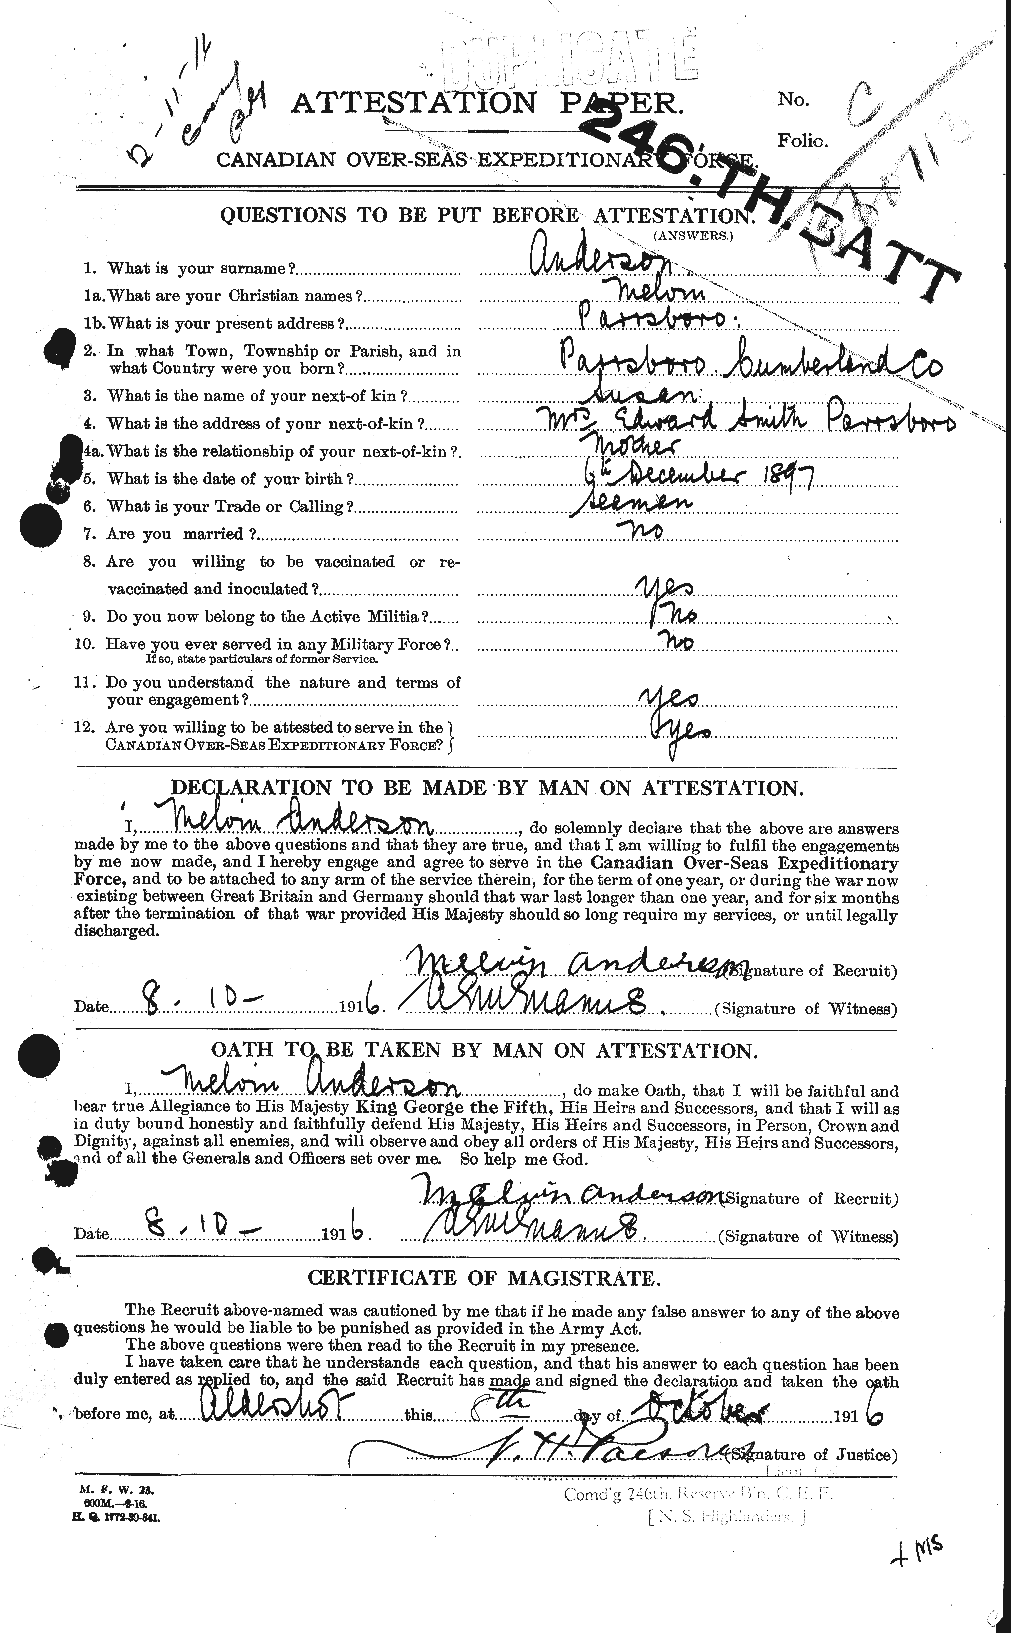 Personnel Records of the First World War - CEF 207424a